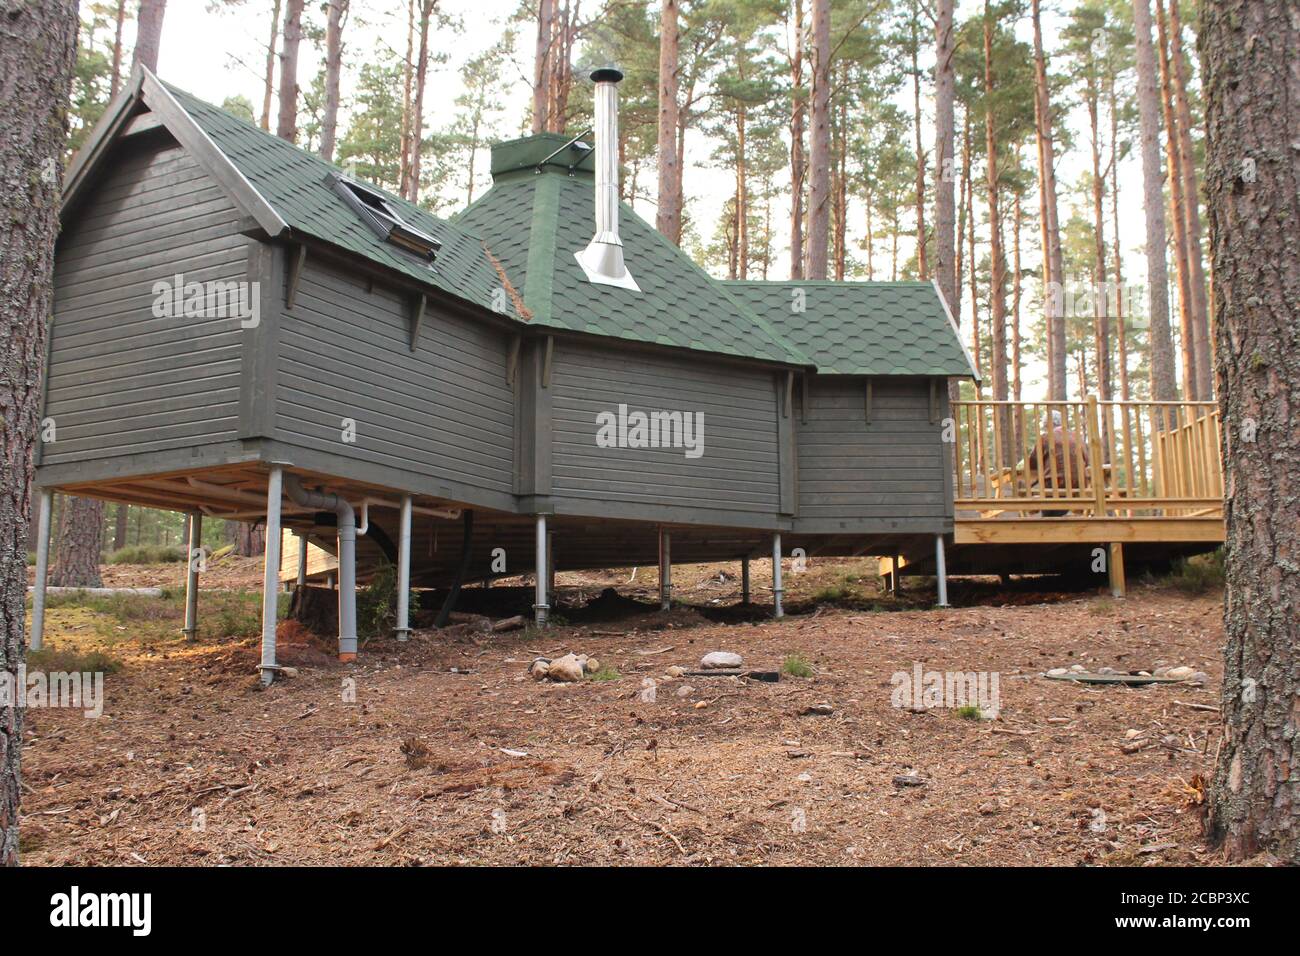 A bothy in Scotland on metal stilts in the forest Stock Photo